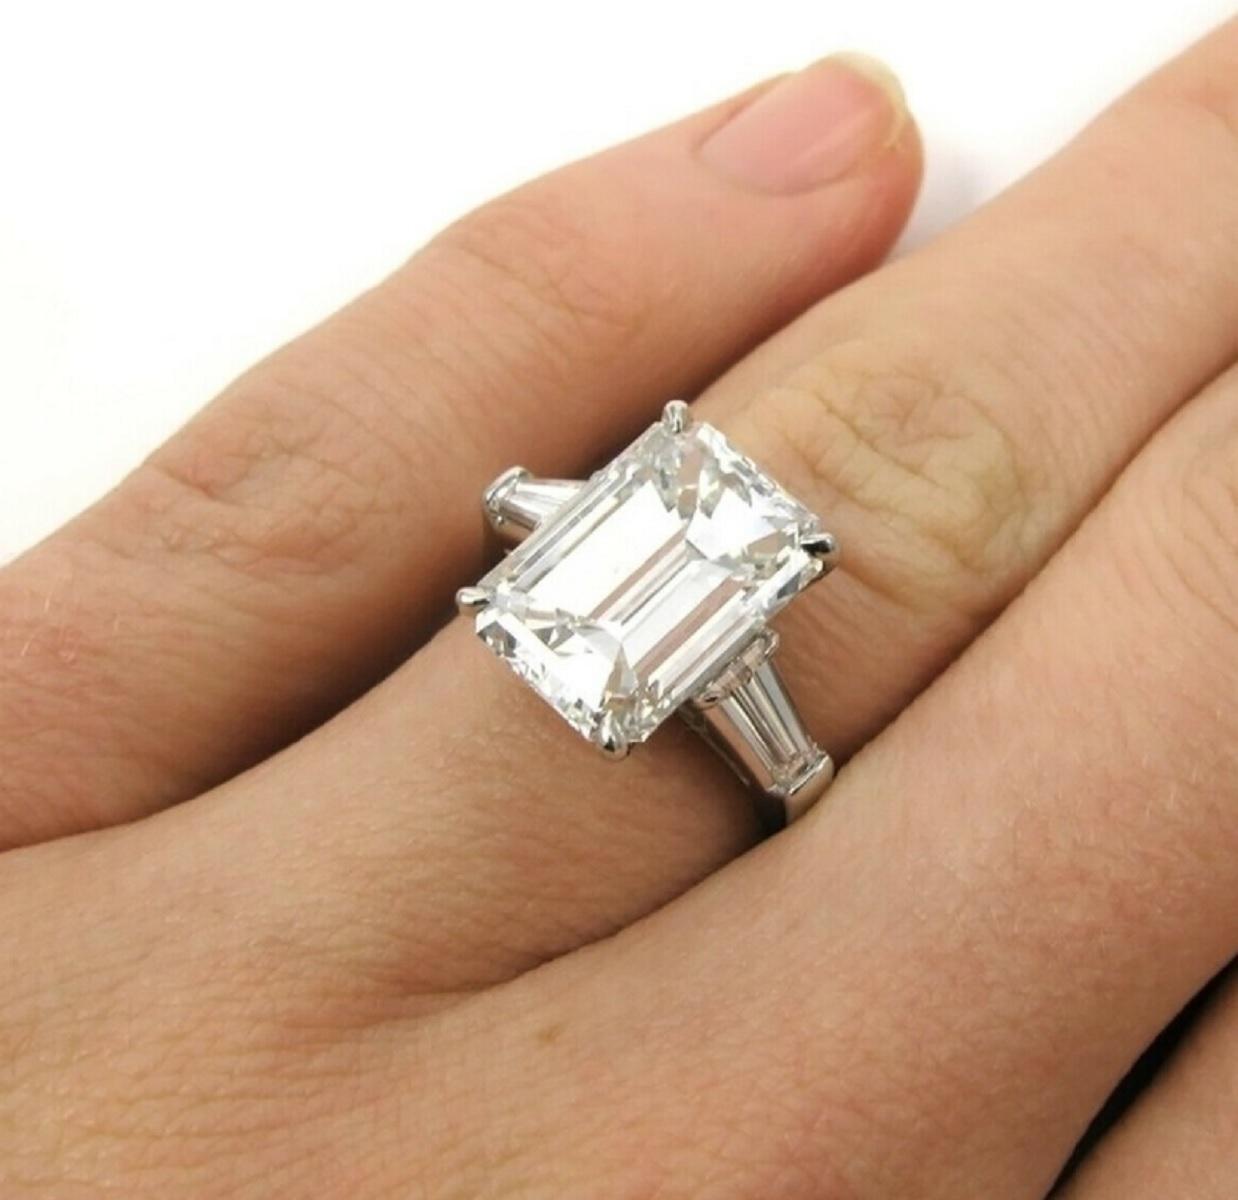 This elegant, high quality, and quite substantial 4.30 carat emerald cut diamond ring has beautiful white color, and a bright, lively, sophisticated cut! 

The diamond is certified by GIA, the world’s premiere gemological authority. 

The diamond is